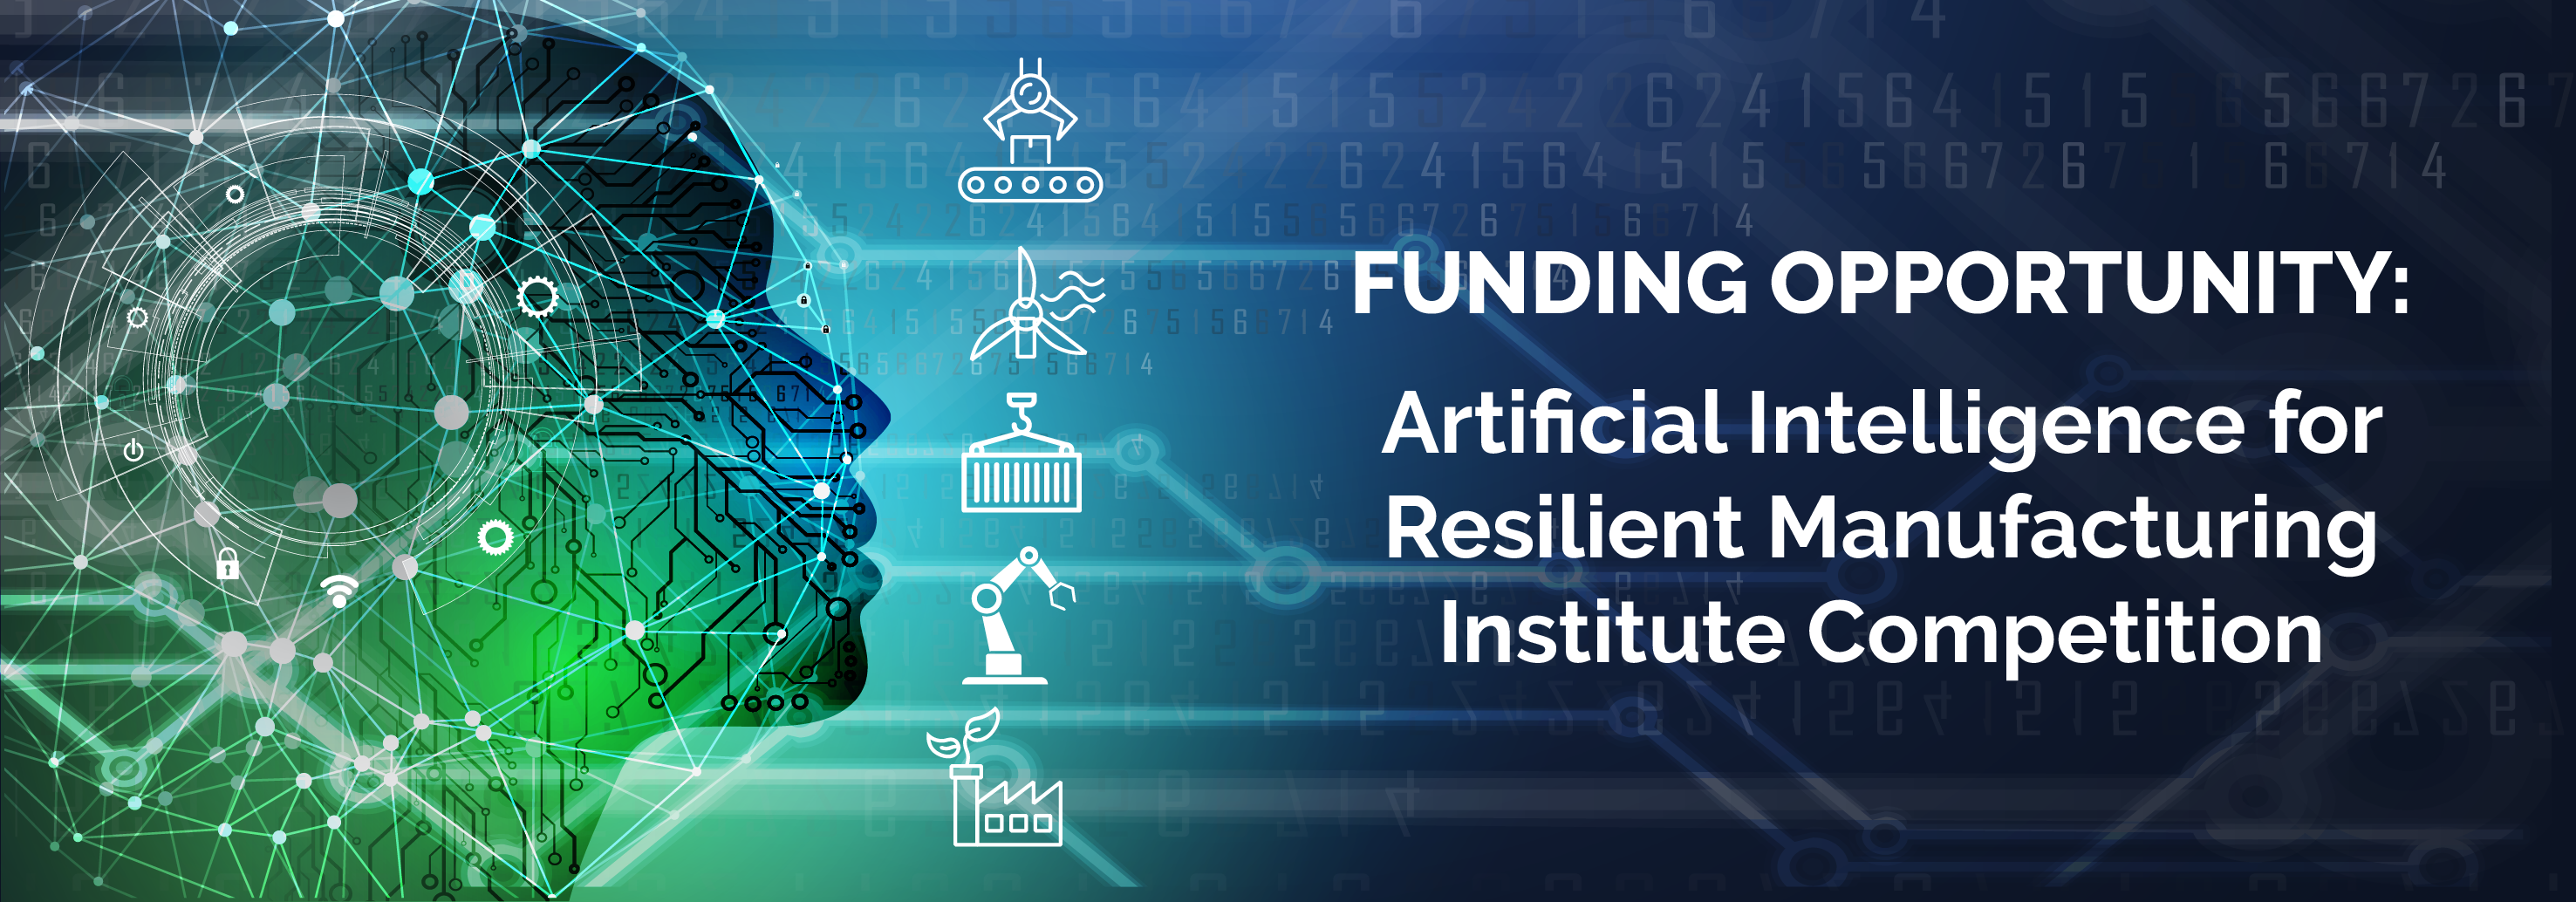 Graphic depicting artificial intelligence and technology. Text reads: "Artificial Intelligence for Resilient Manufacturing Institute Competition" 